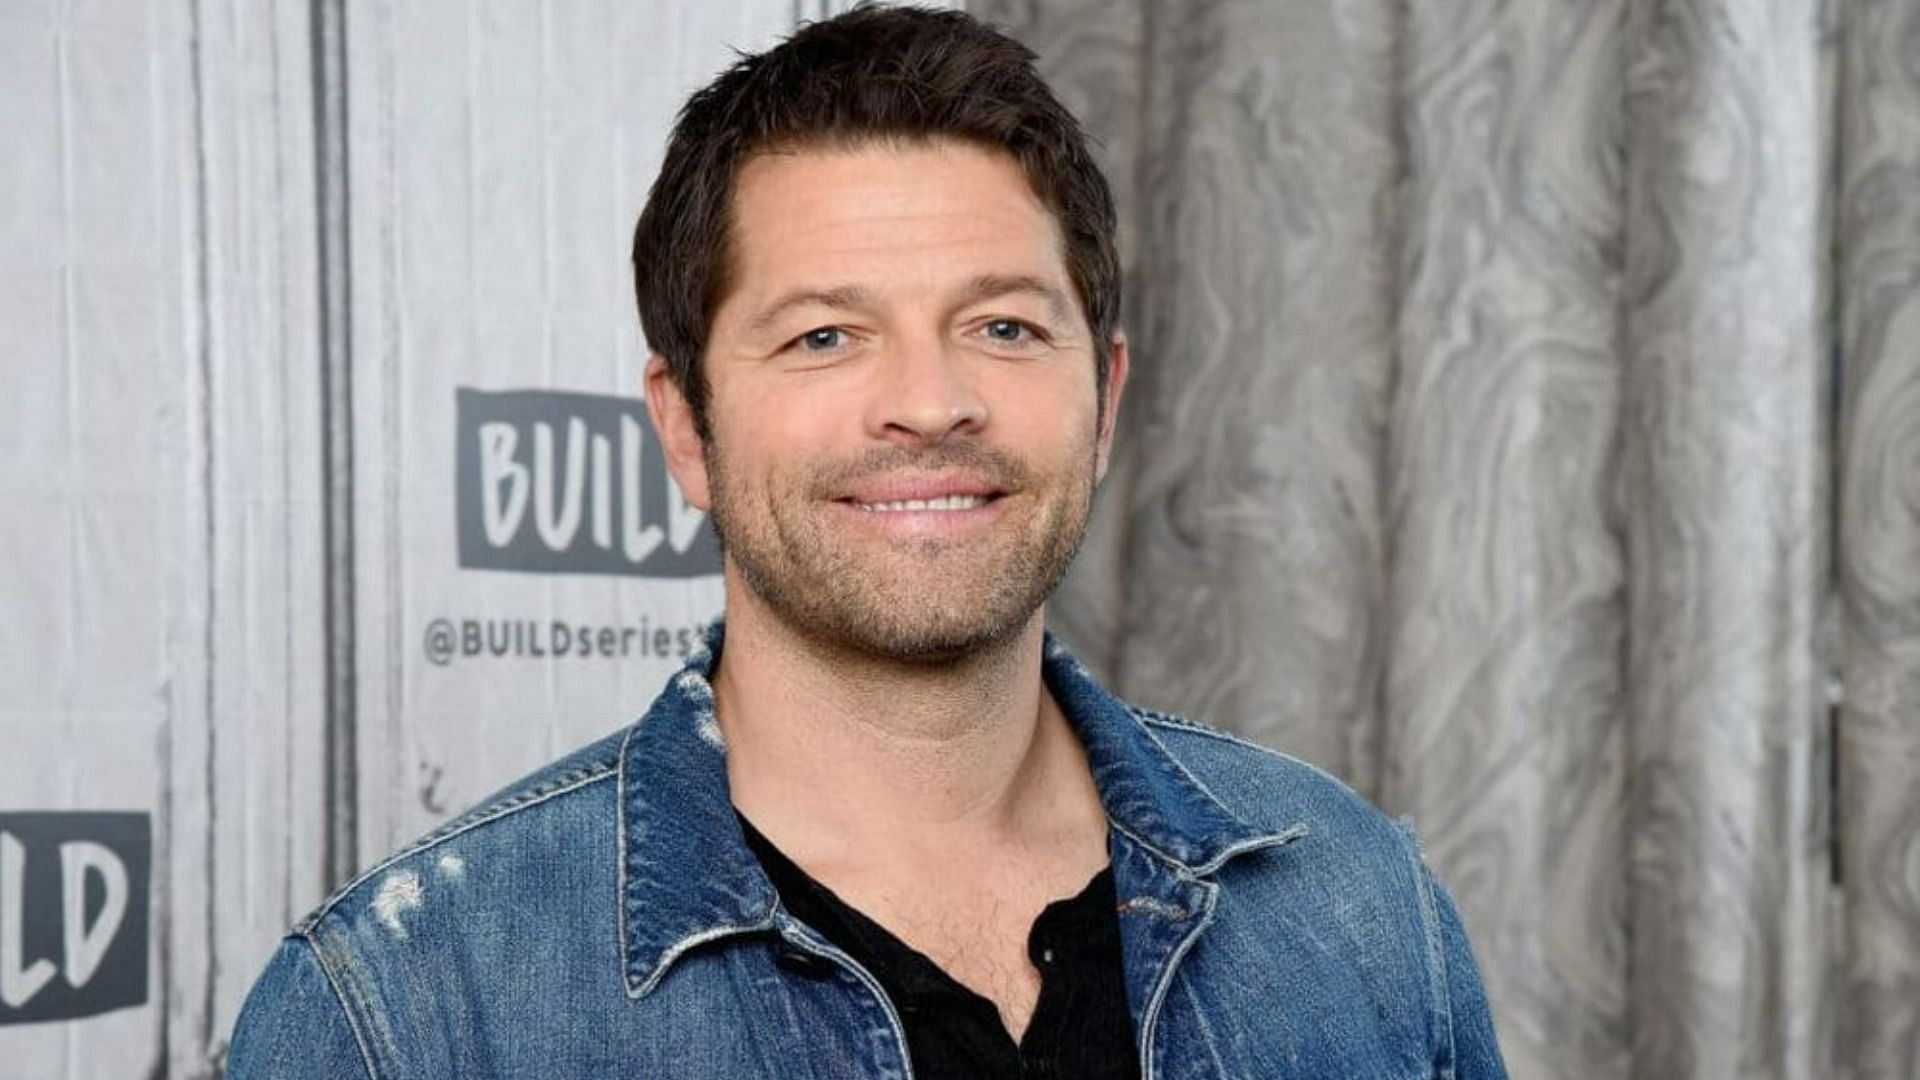 Misha Collins comes out as bisexual by mistake, leads to hilarious memes online (Image via Gary Gershoff/Getty Images)